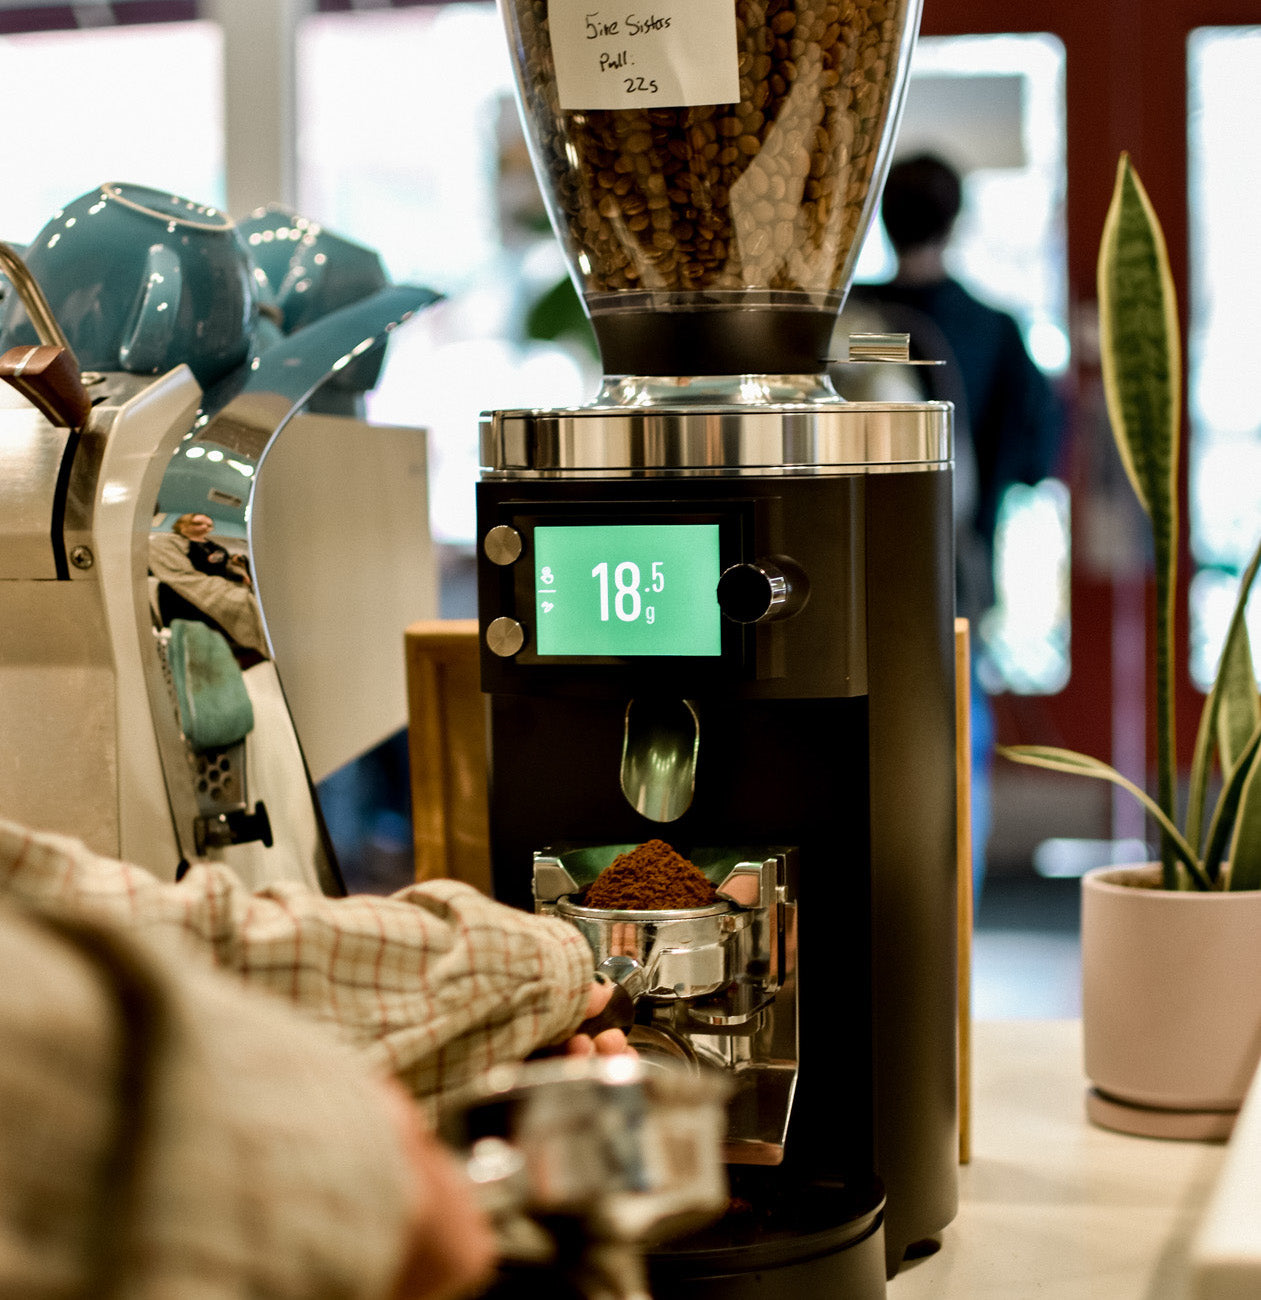 barista using Mahlkonig grinder to weigh out 18.5 grams of coffee for espresso shot